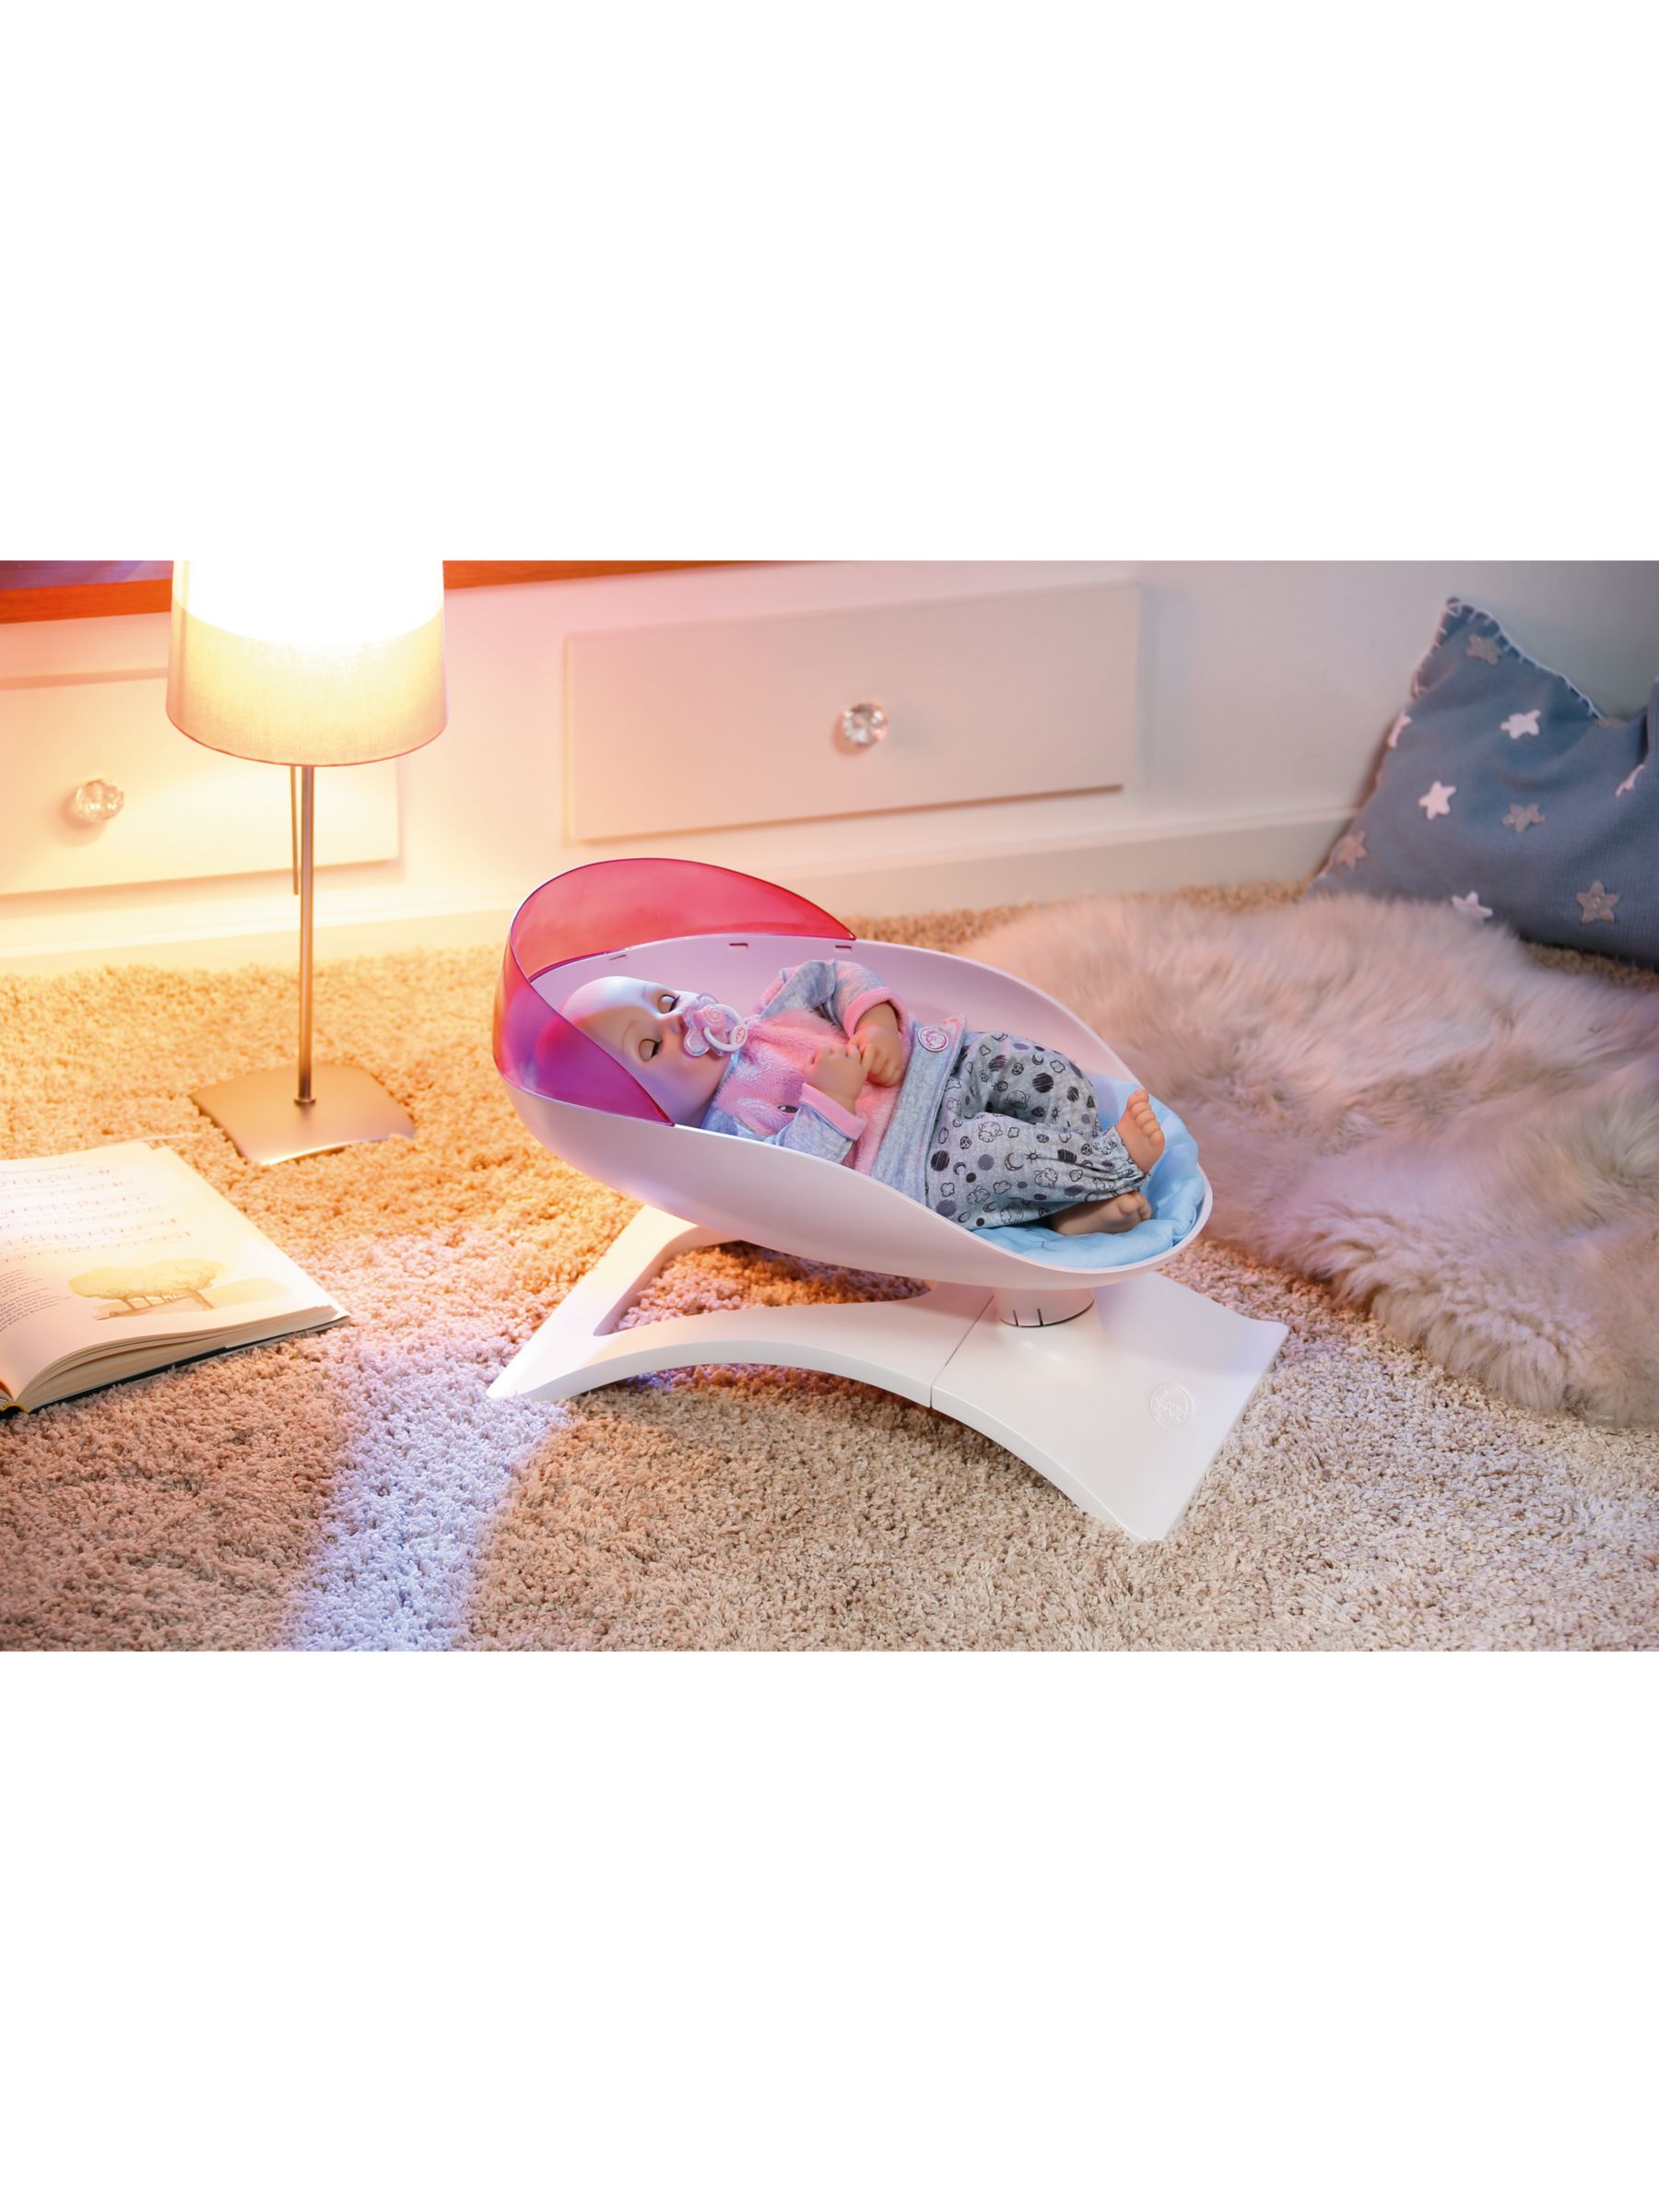 baby annabell bed and rocker